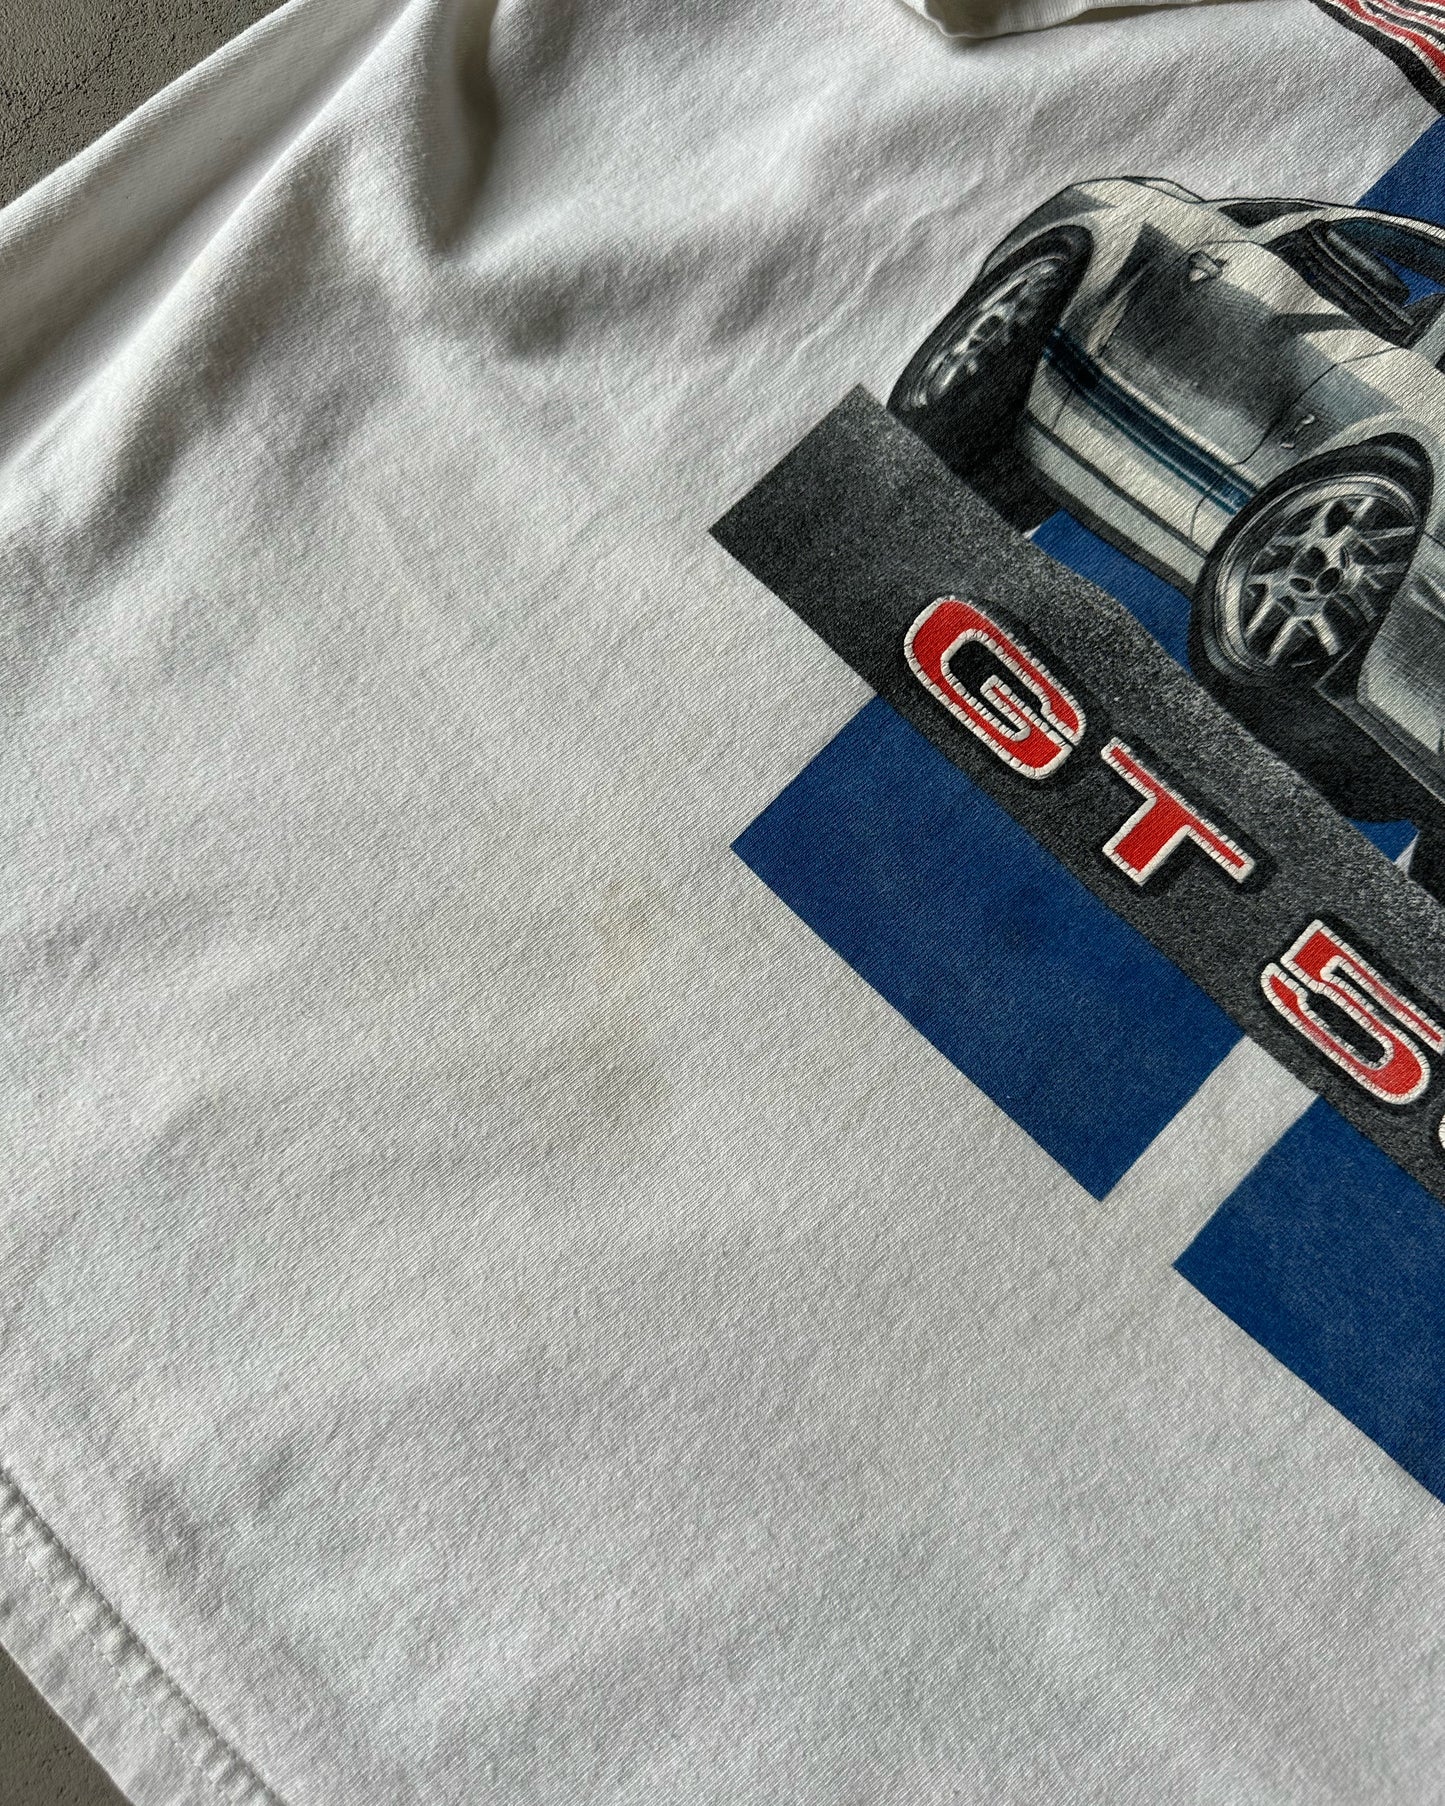 2000s - White Ford GT500 T-Shirt - XL